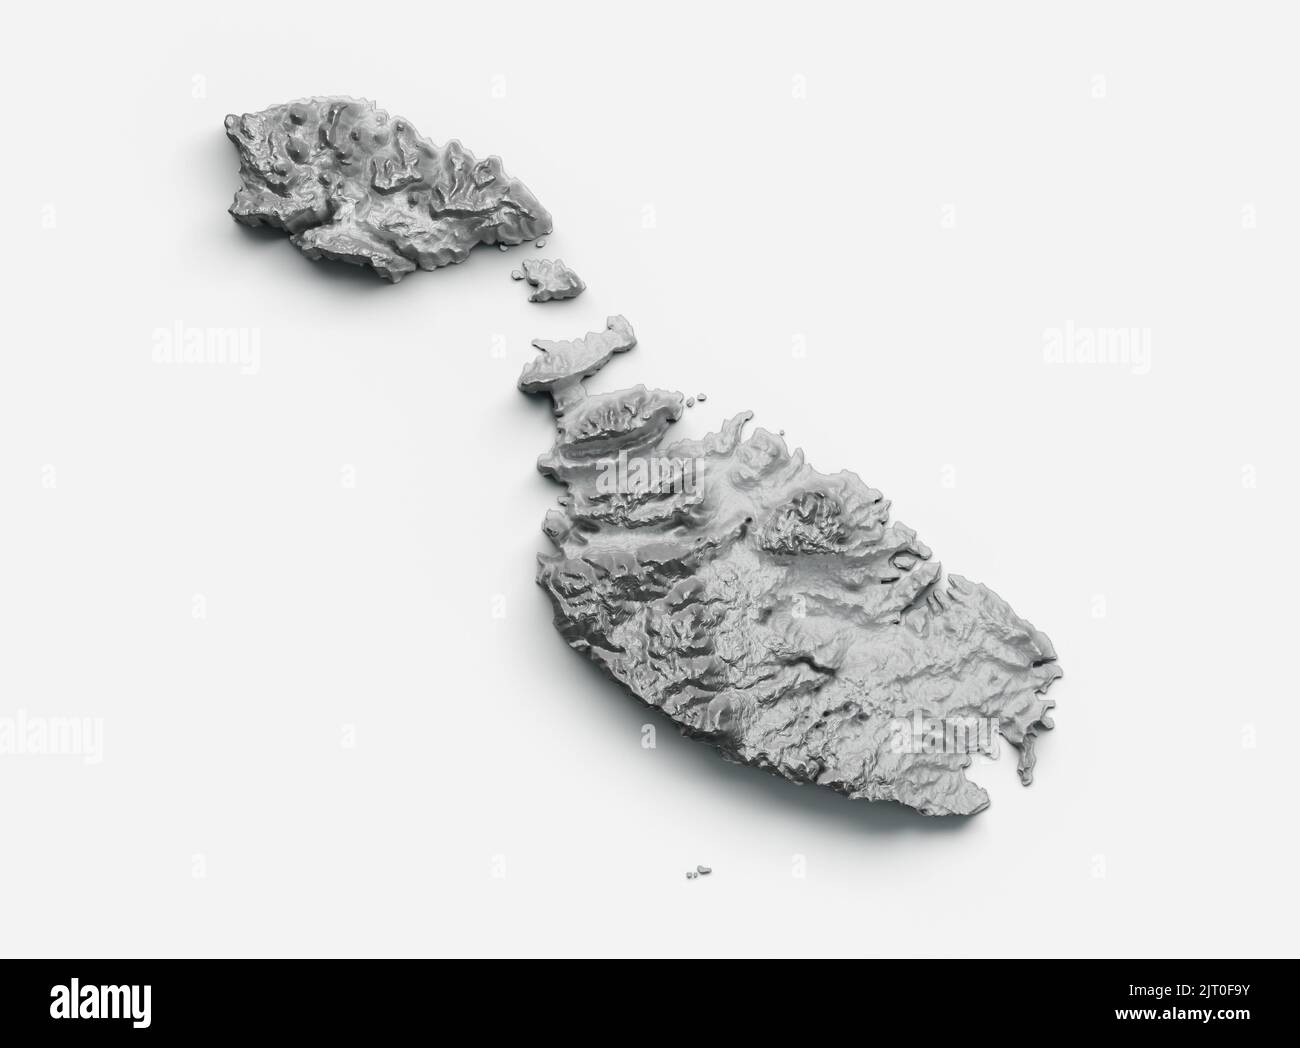 A grayscale 3D illustration of the Malta map on a white background Stock Photo